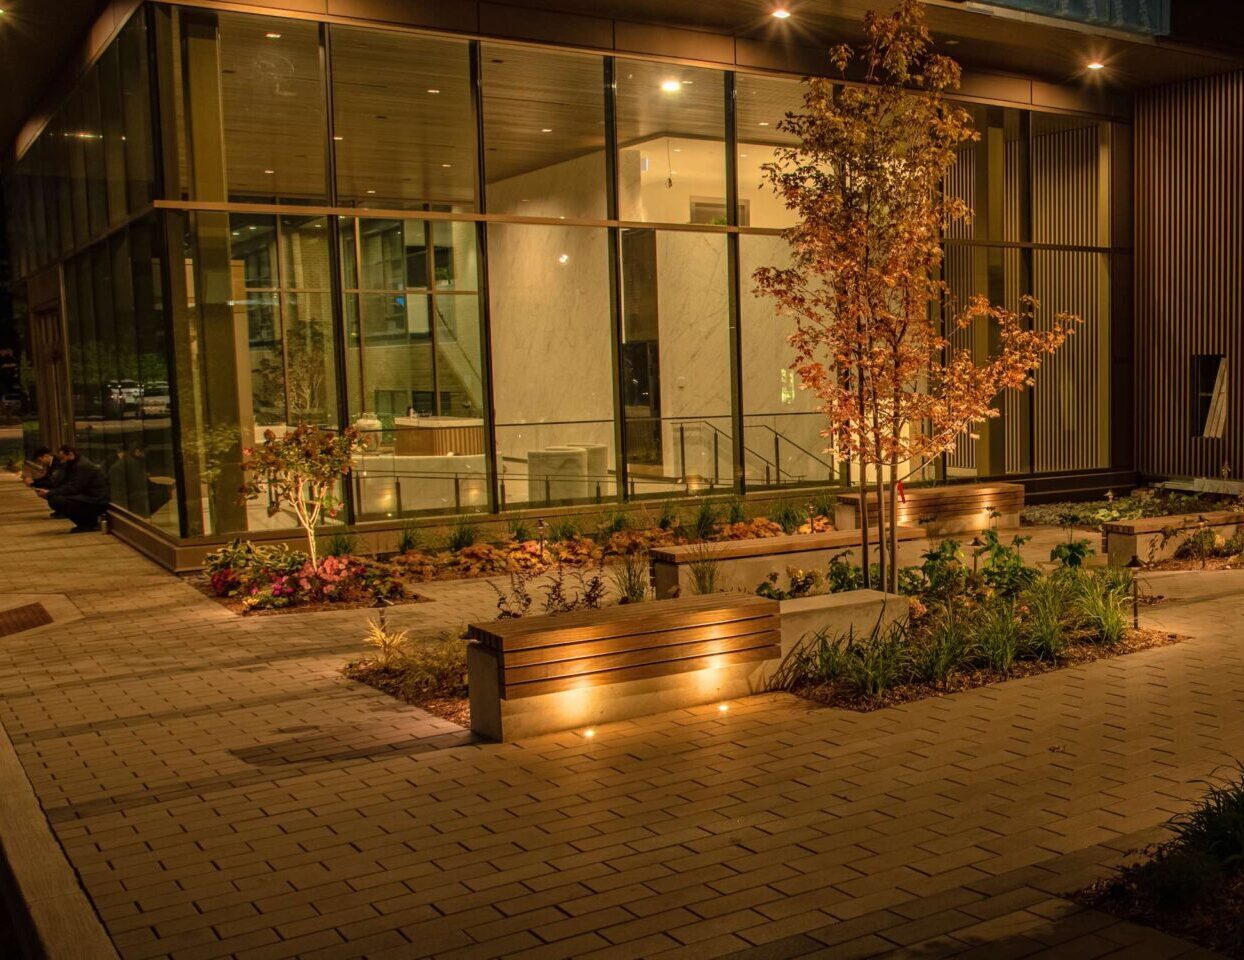 Banner Photos for Website - Next to: Experience the Benefits of Landscape Lighting in Toronto and the GTA with Eco Springs